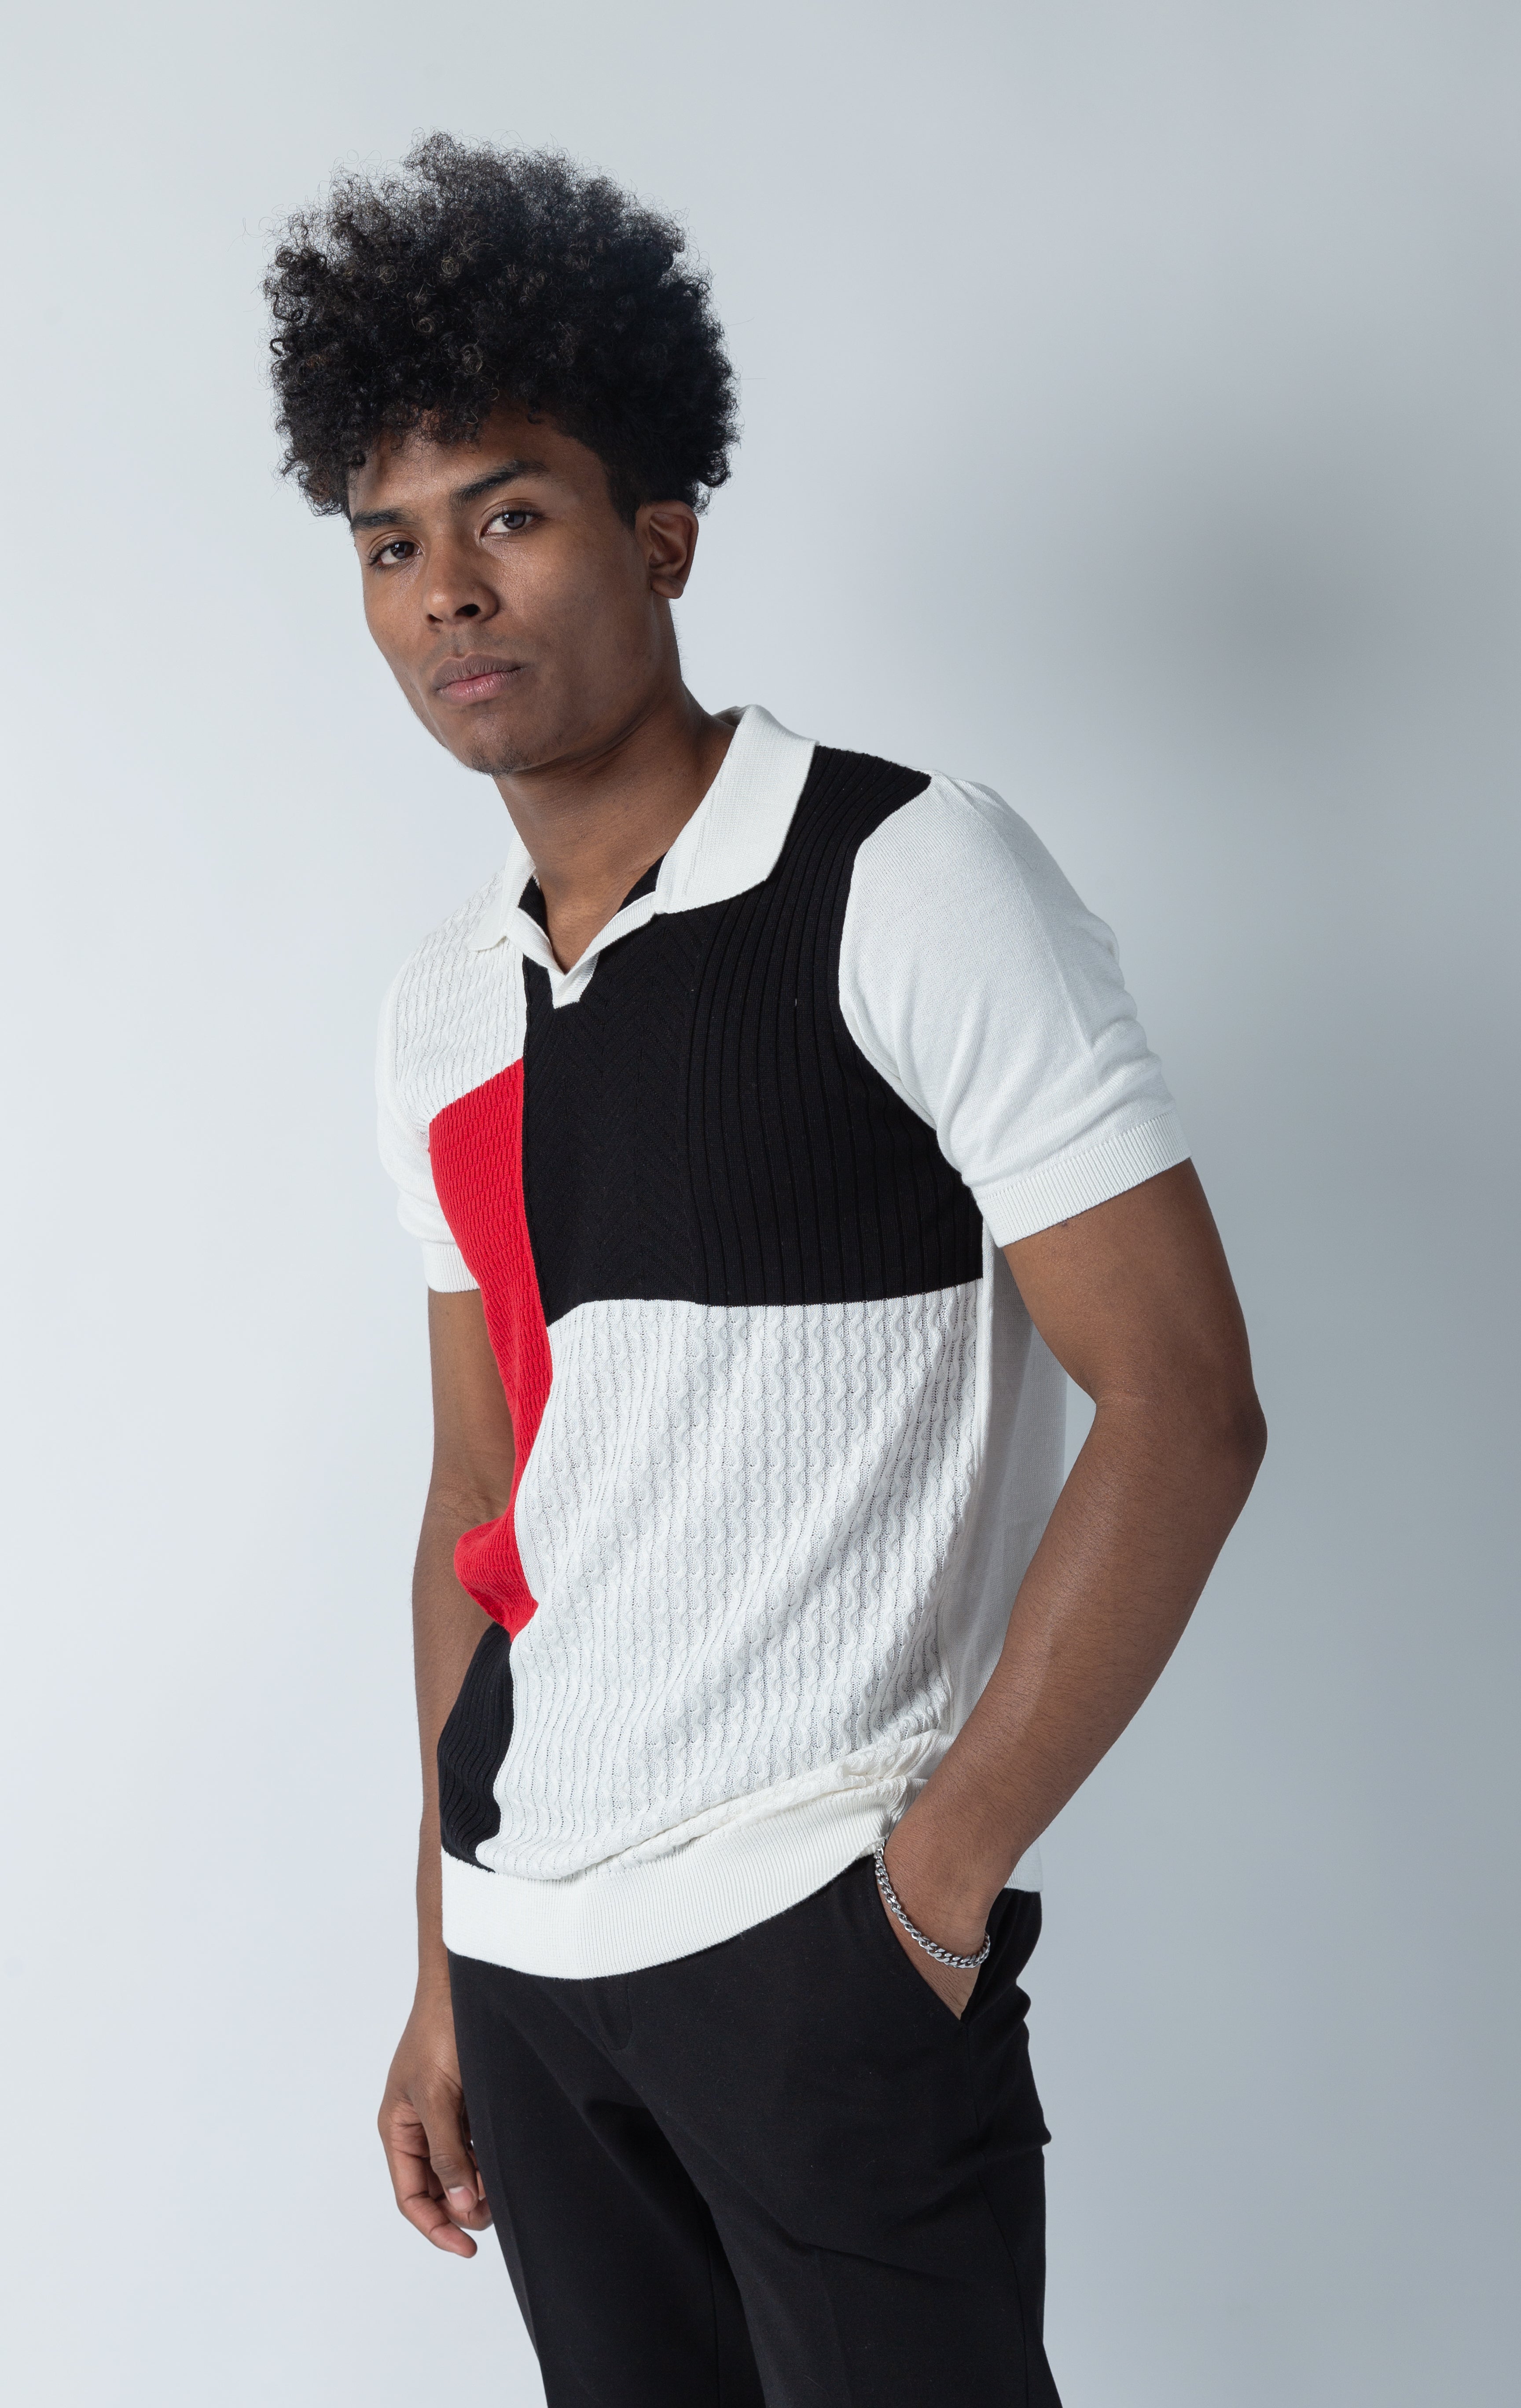 White v-neck polo shirt with a meticulously detailed button placket for an exclusive, stylish look.